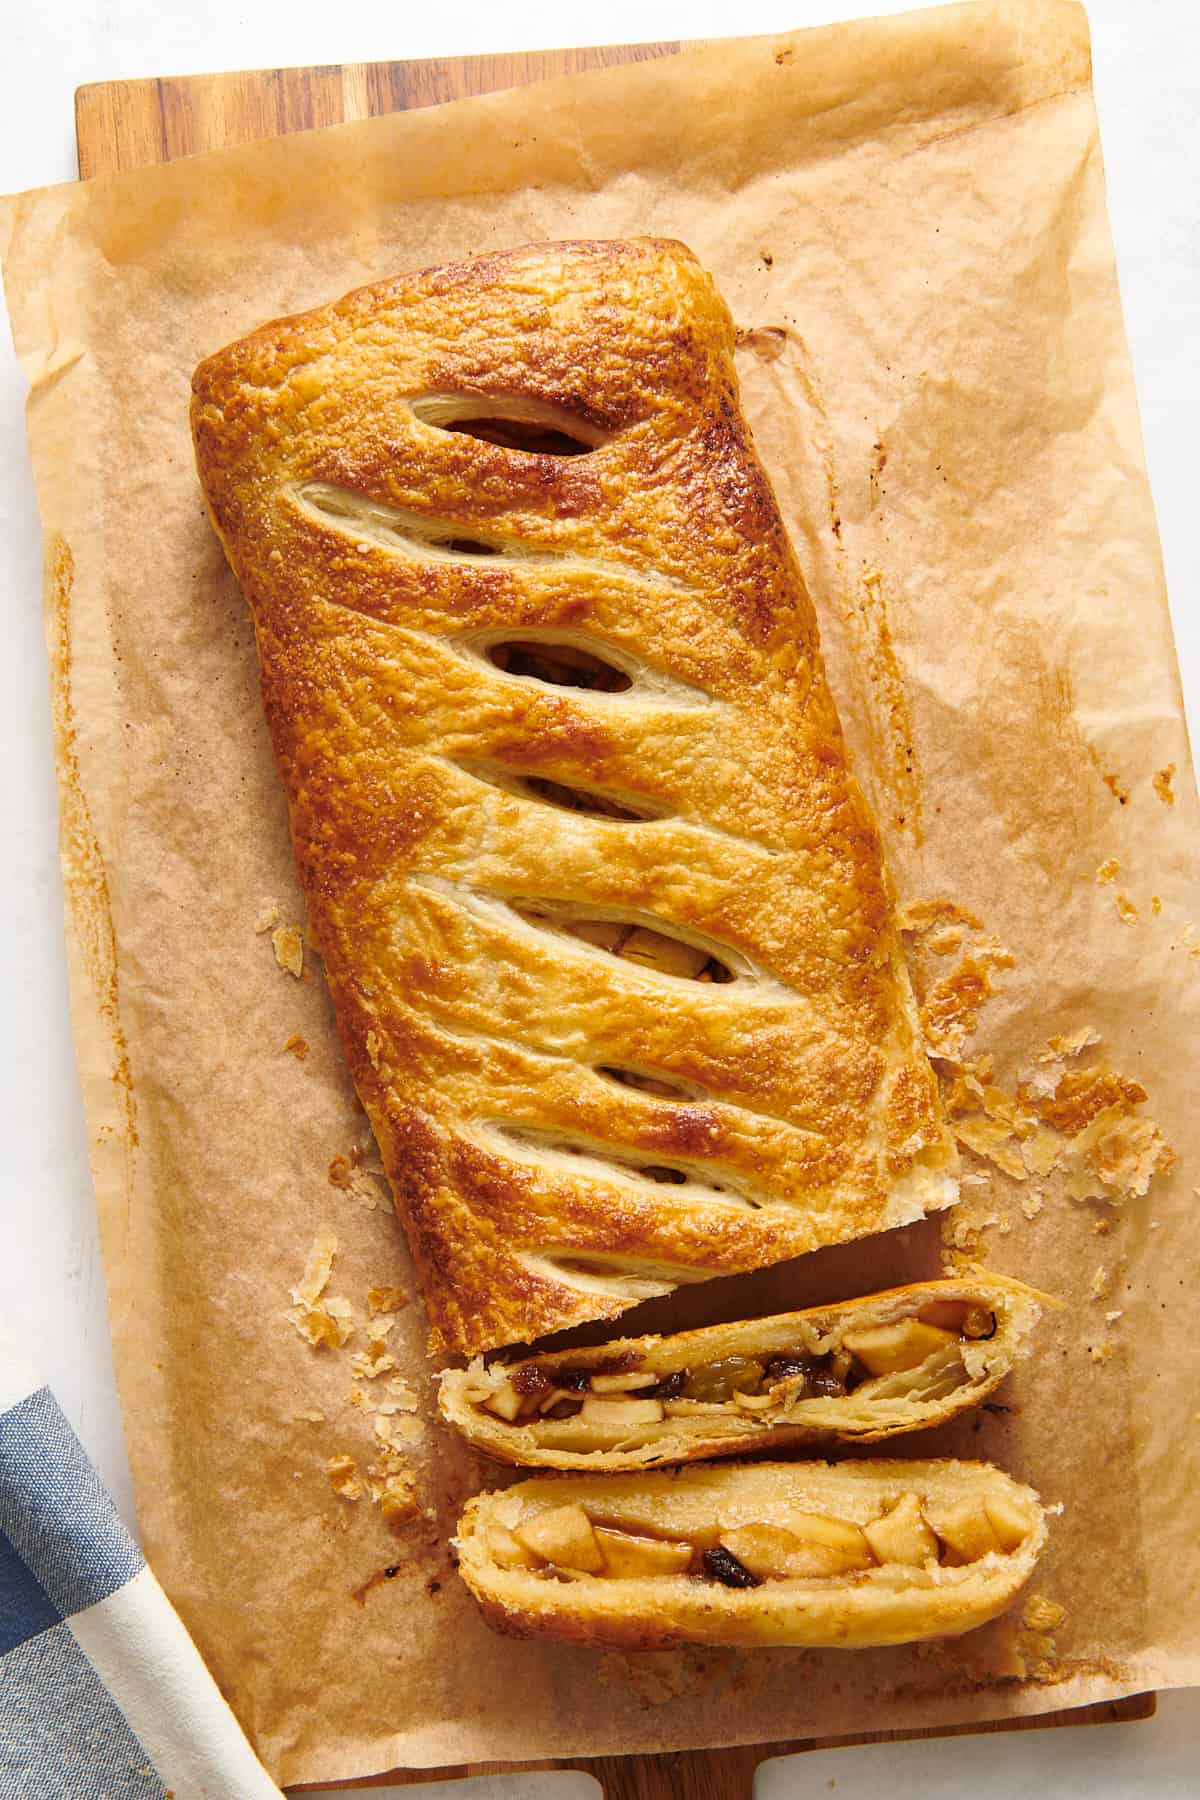 top down image of baked apple strudel sitting on parchment paper on a wood board with two slices cut showing the cross section